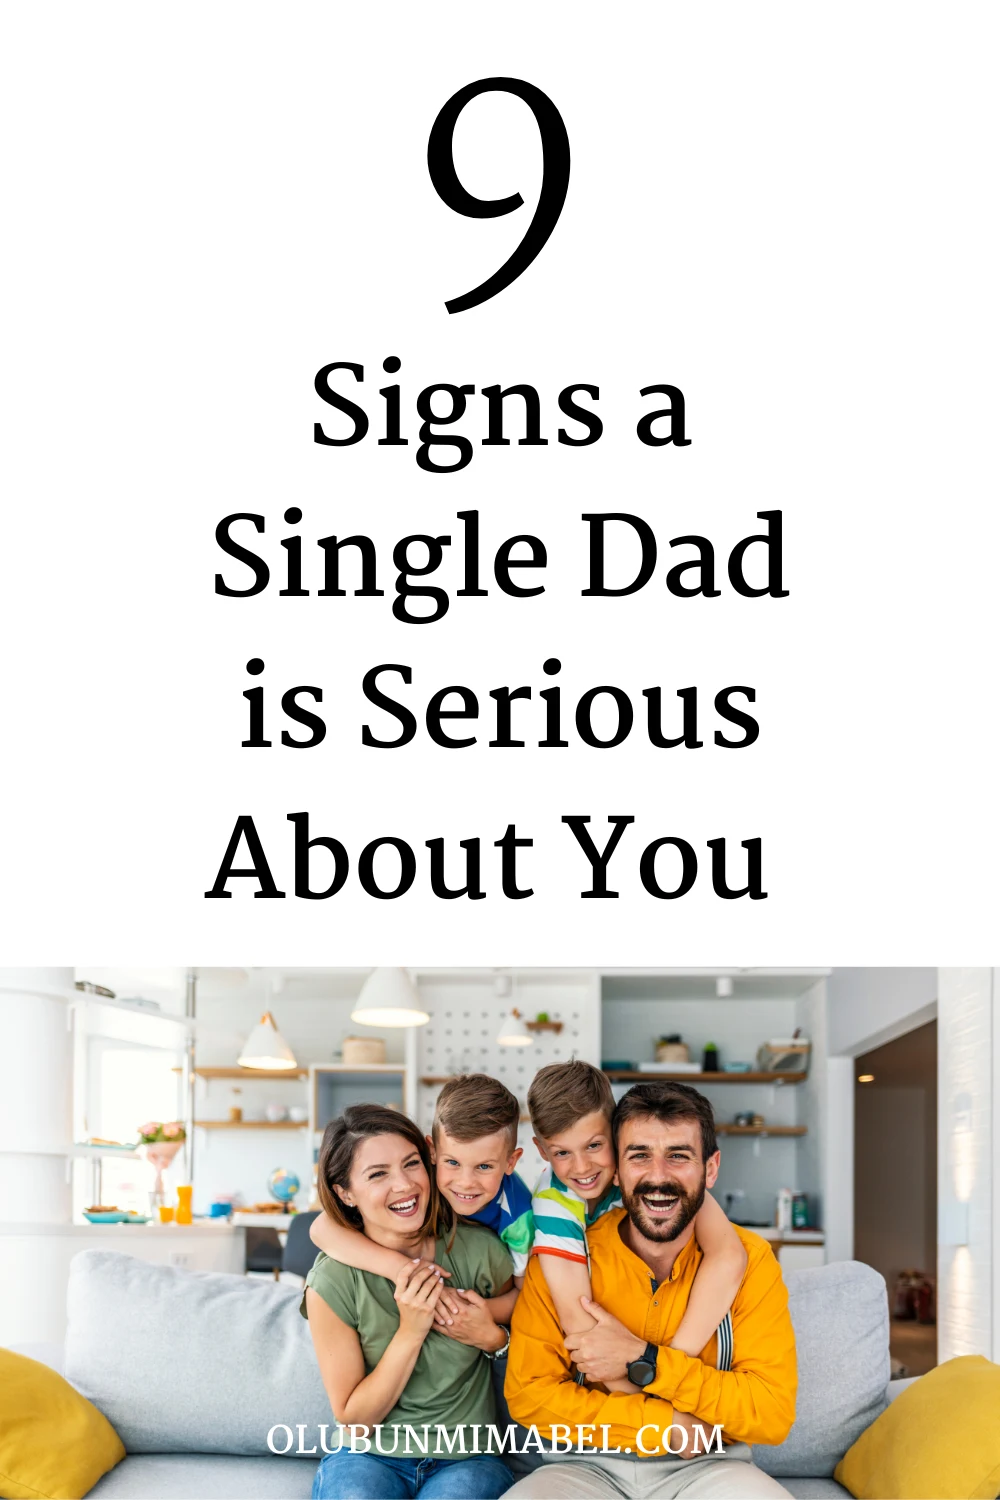 Signs a Single Dad is Serious About You